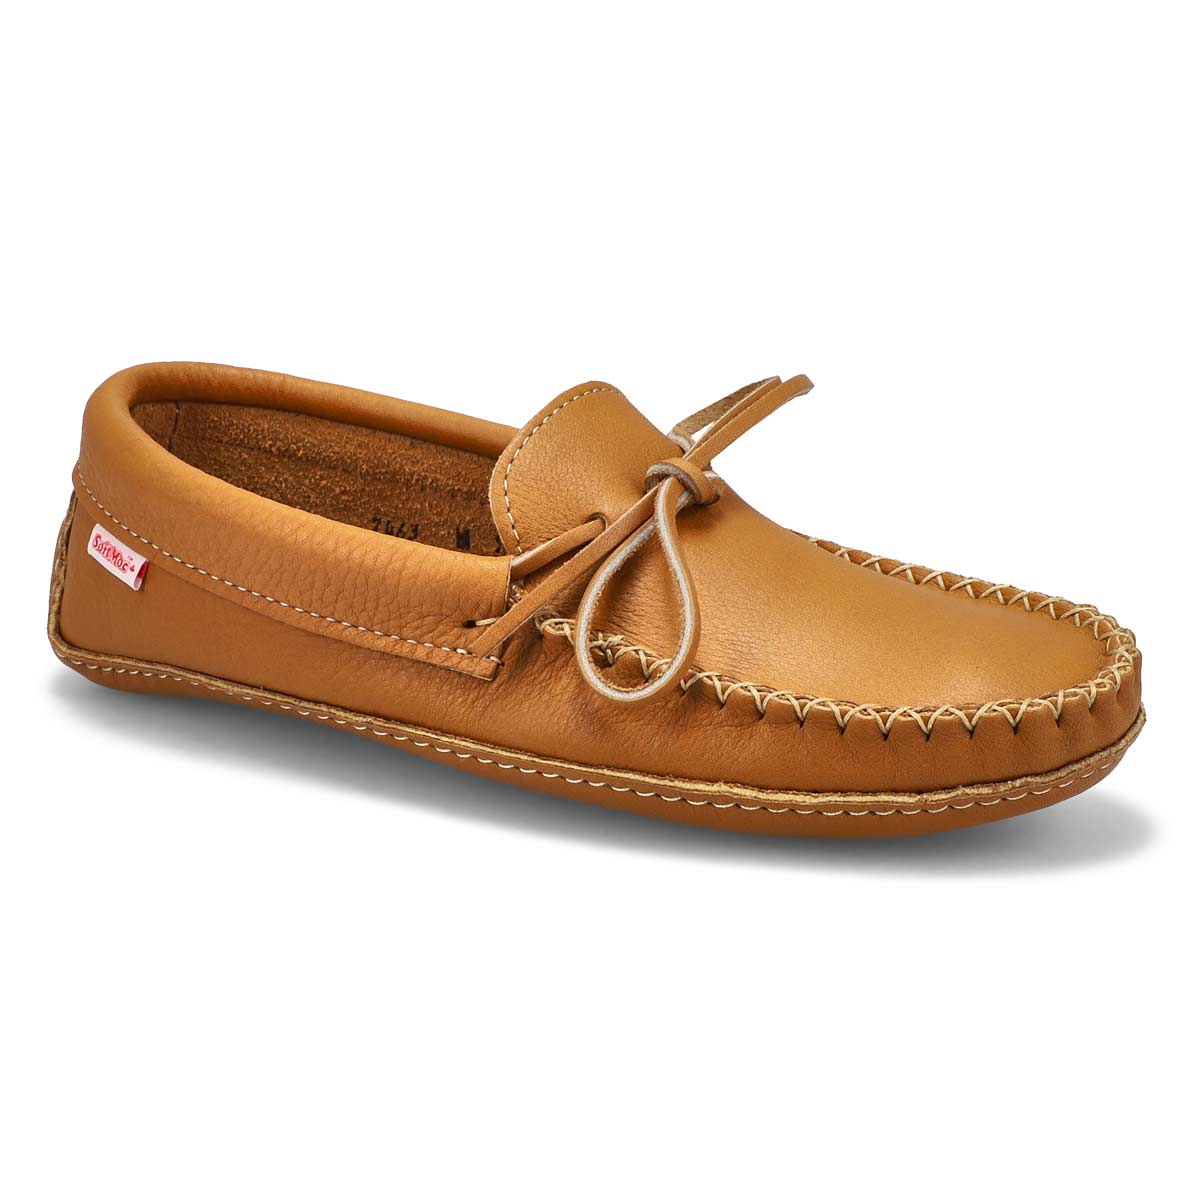 SoftMoc Men's 7463 Double Sole Unlined SoftMo | SoftMoc.com